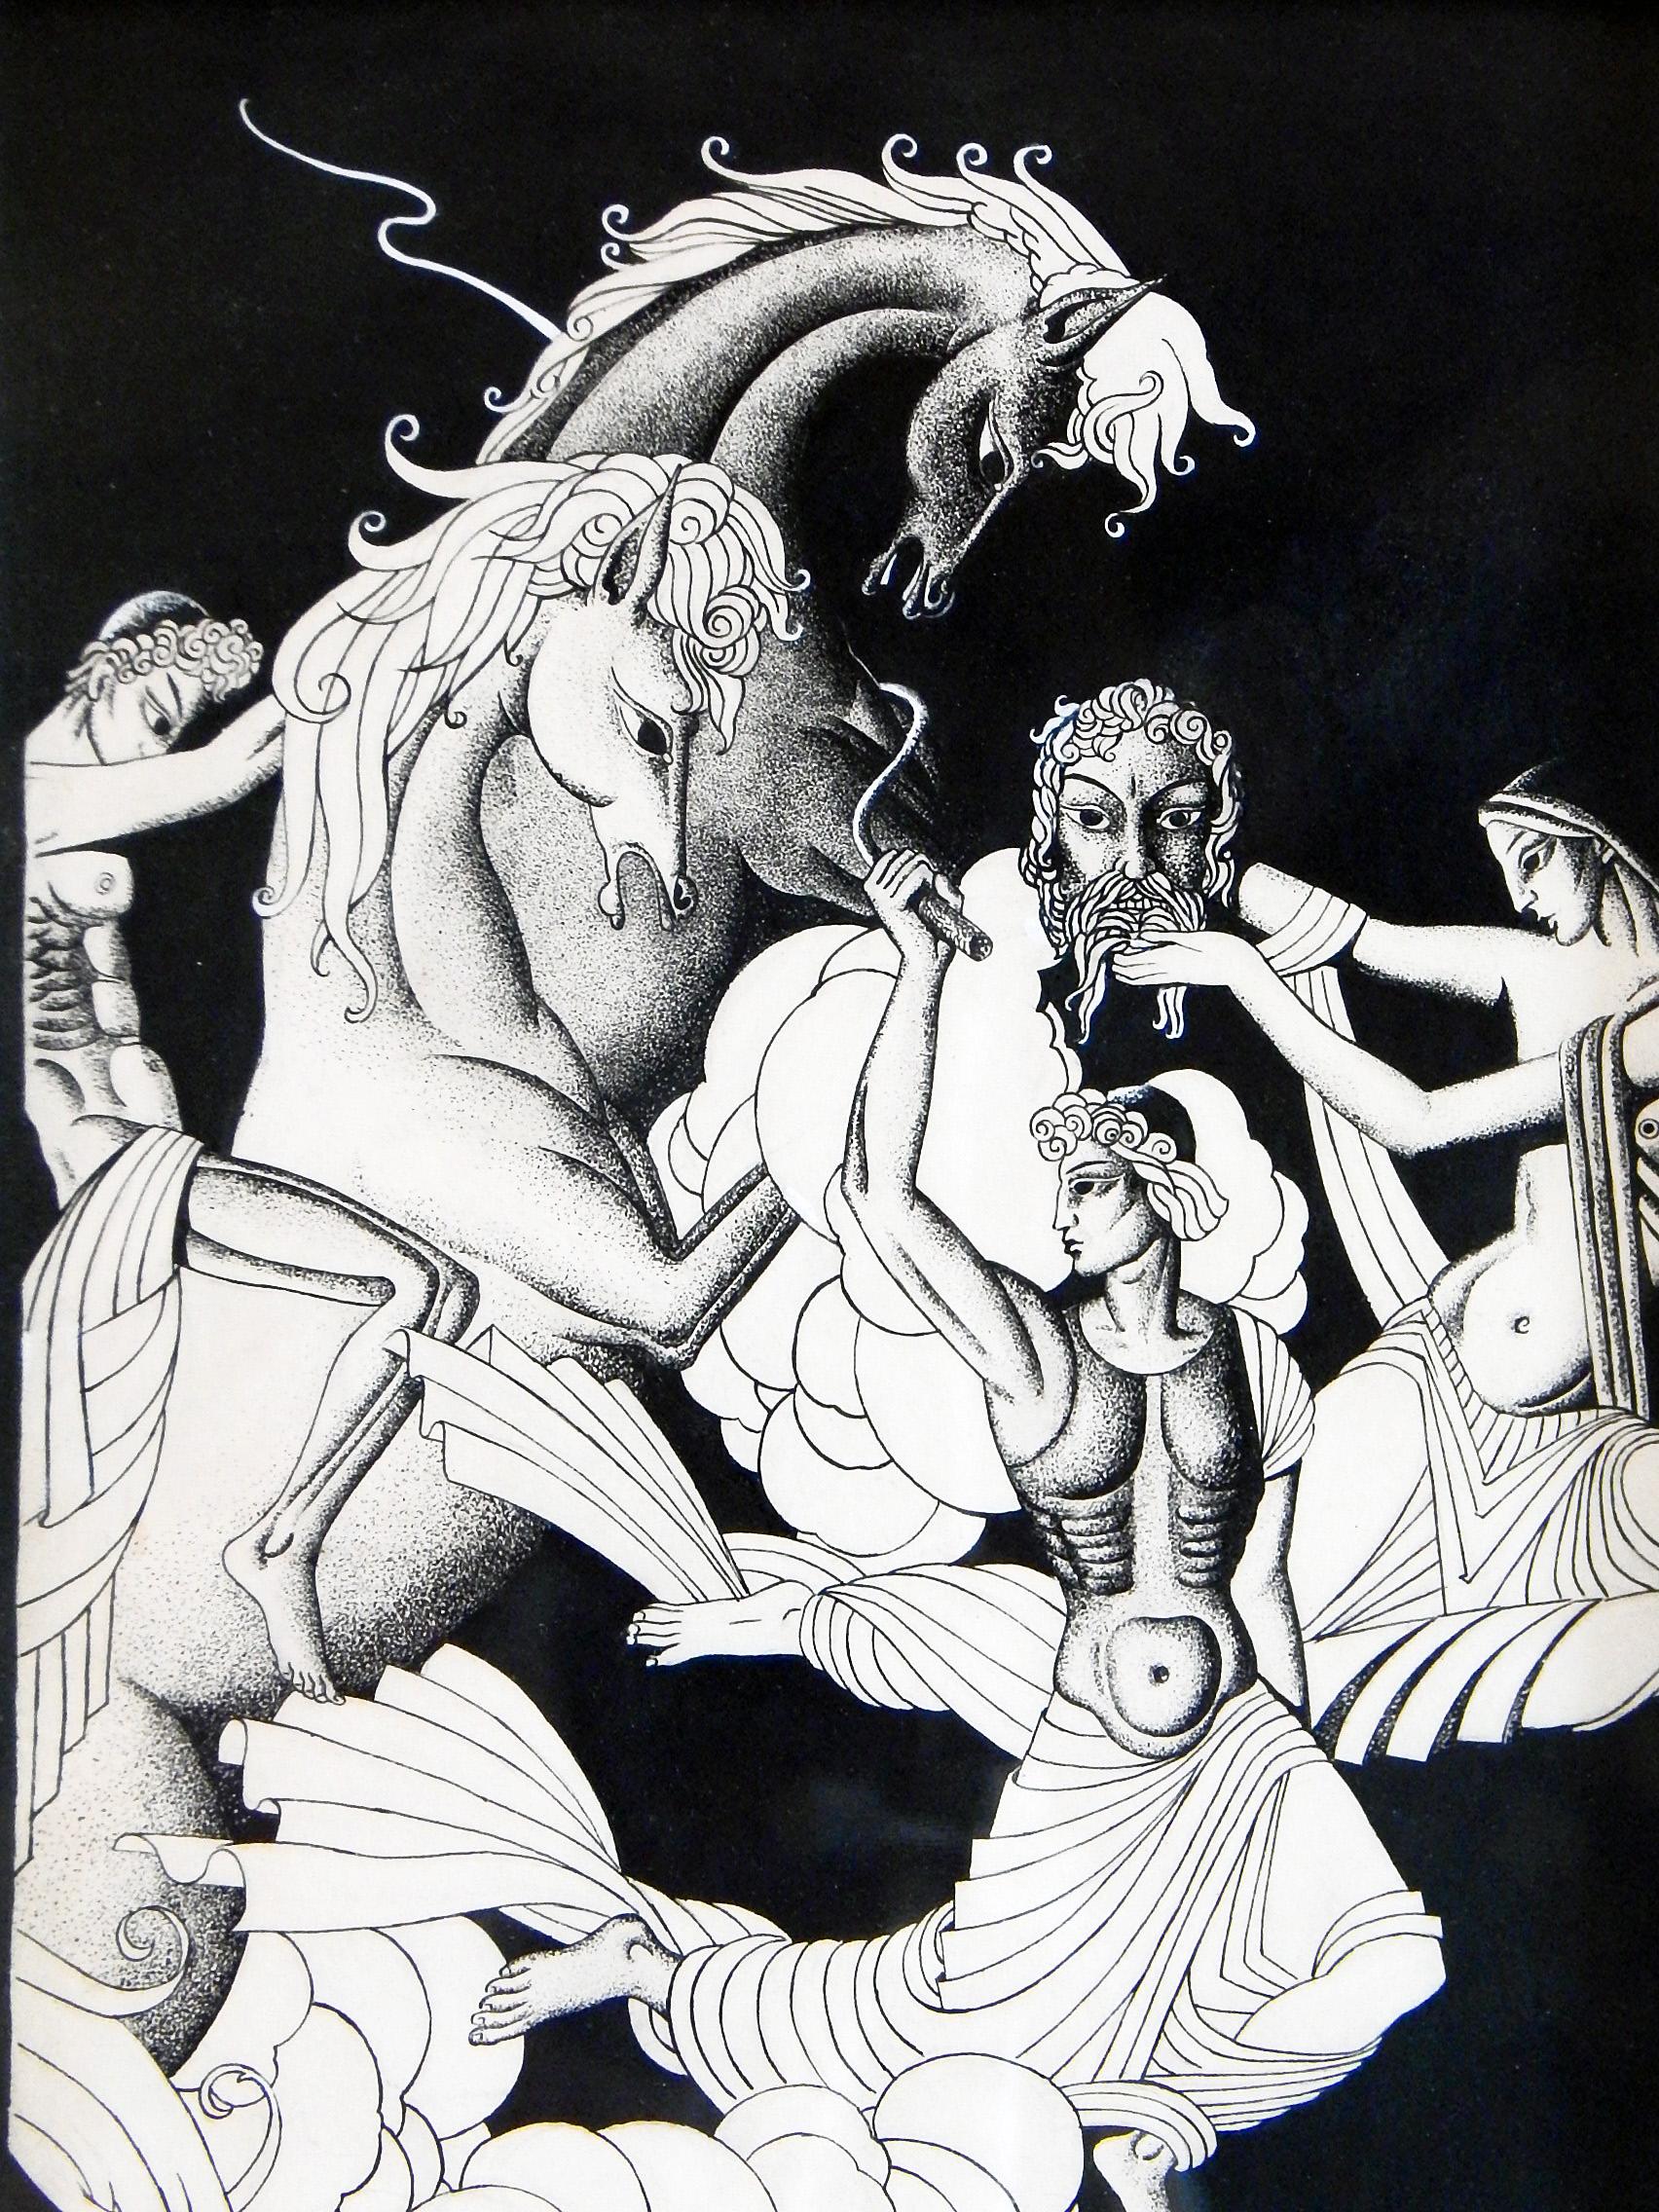 This virtuosic pen-and-ink drawing shows several gods cavorting with wild-maned horses in an Art Deco galaxy. All the figures are perfectly stylized as if parading across a classical frieze, yet the scene is highly theatrical and energized. The